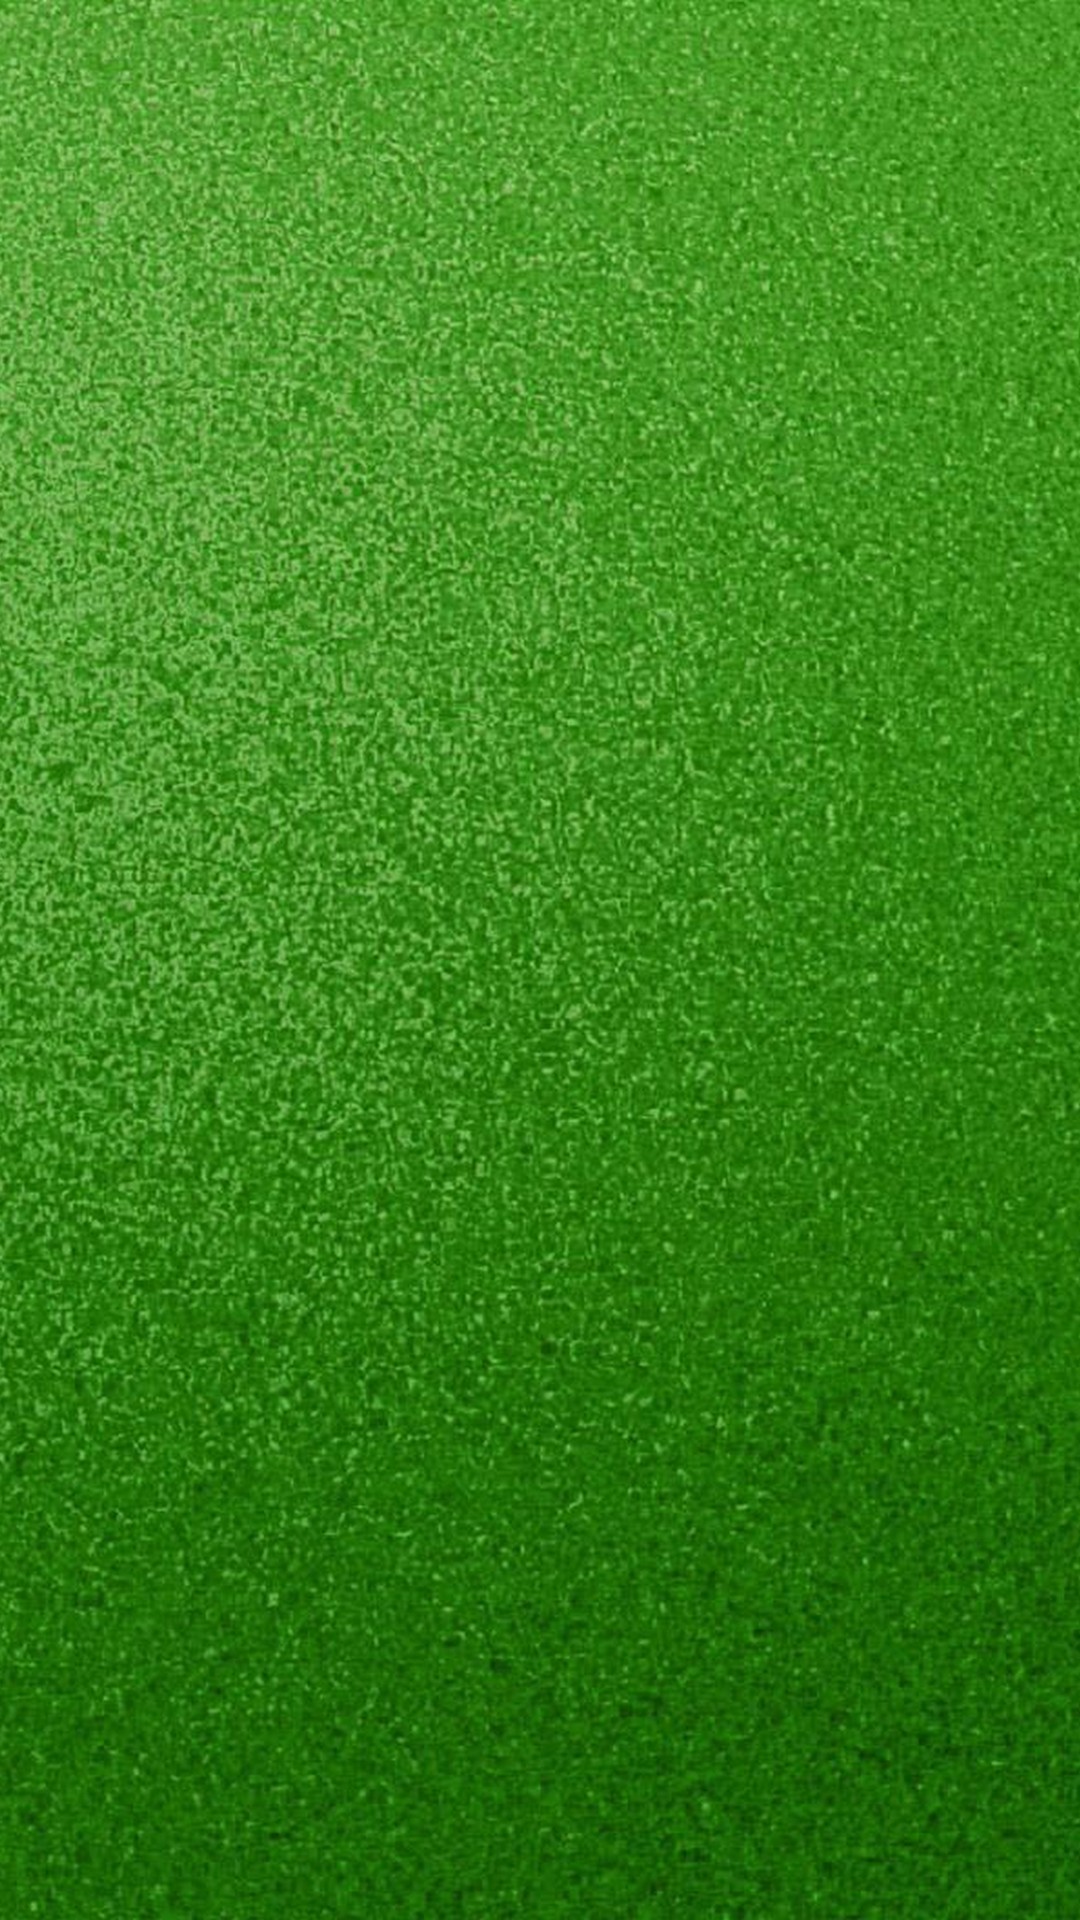 iPhone Wallpaper Green with image resolution 1080x1920 pixel. You can make this wallpaper for your iPhone 5, 6, 7, 8, X backgrounds, Mobile Screensaver, or iPad Lock Screen